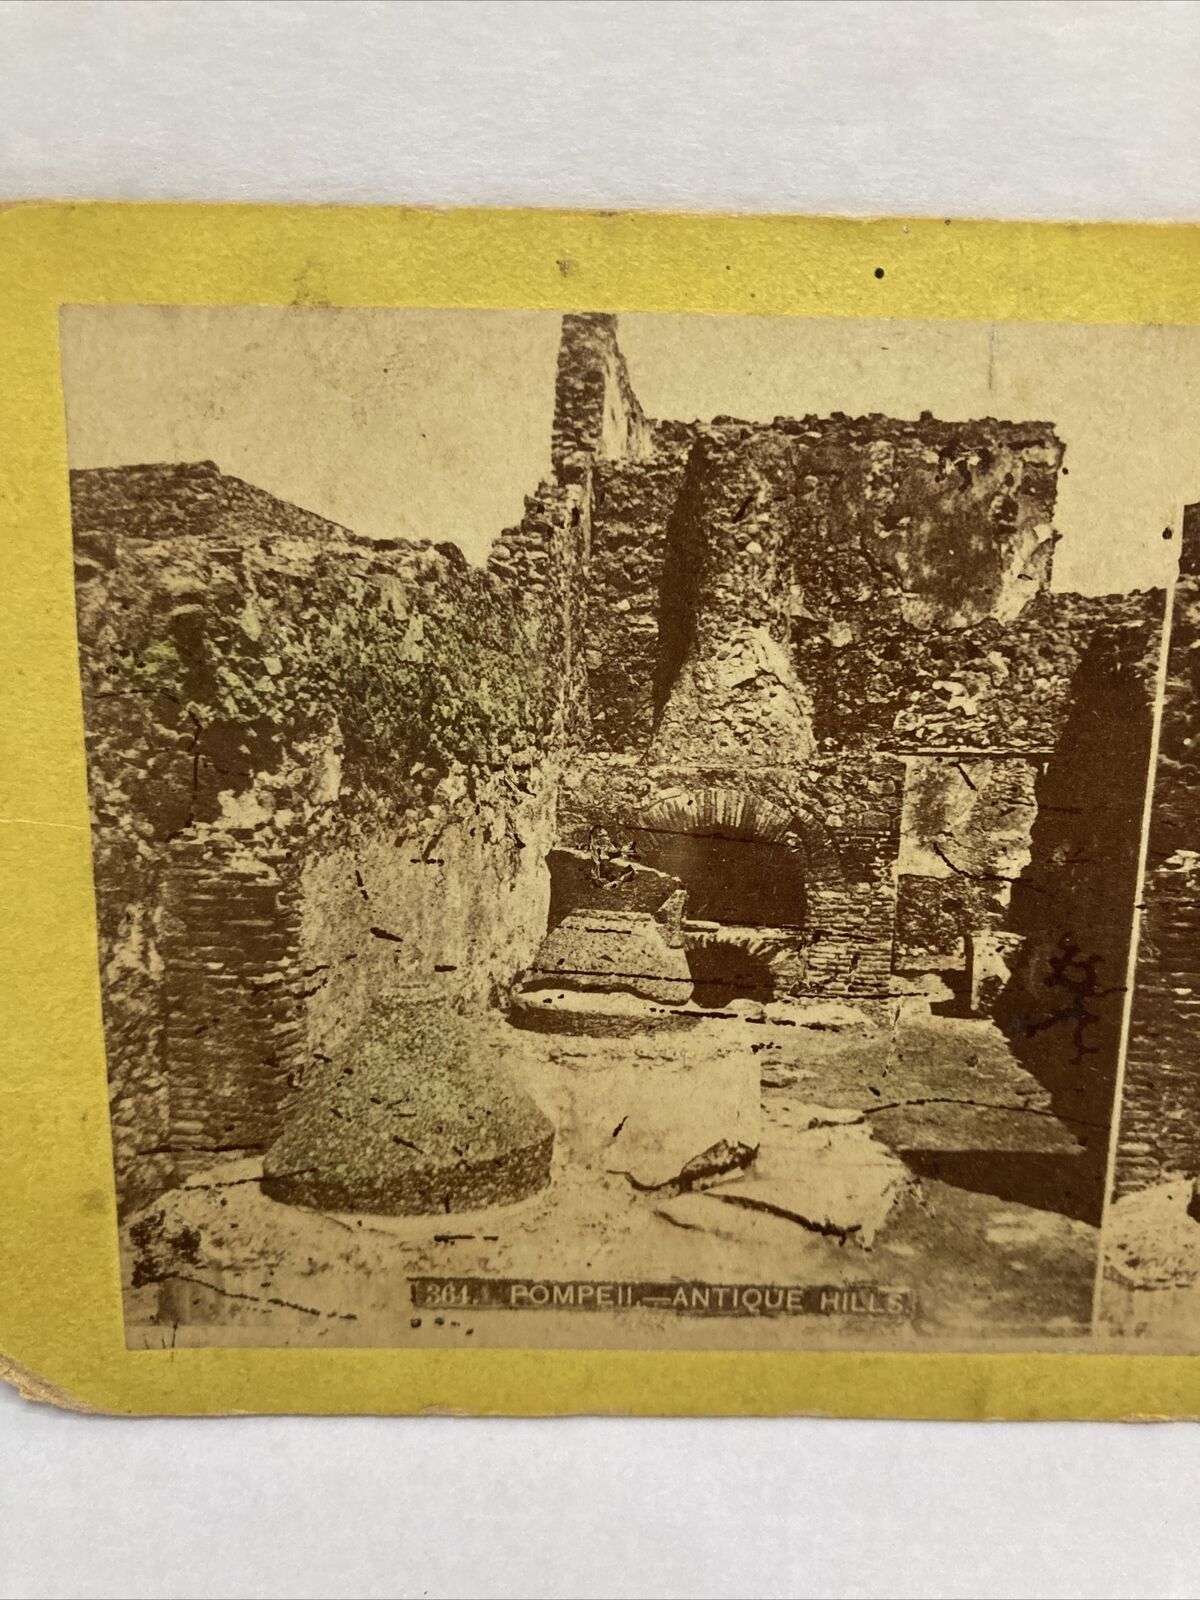 Antique 1800s Pompeii Italy Antique Hills Stereoview Stereograph Photo Card